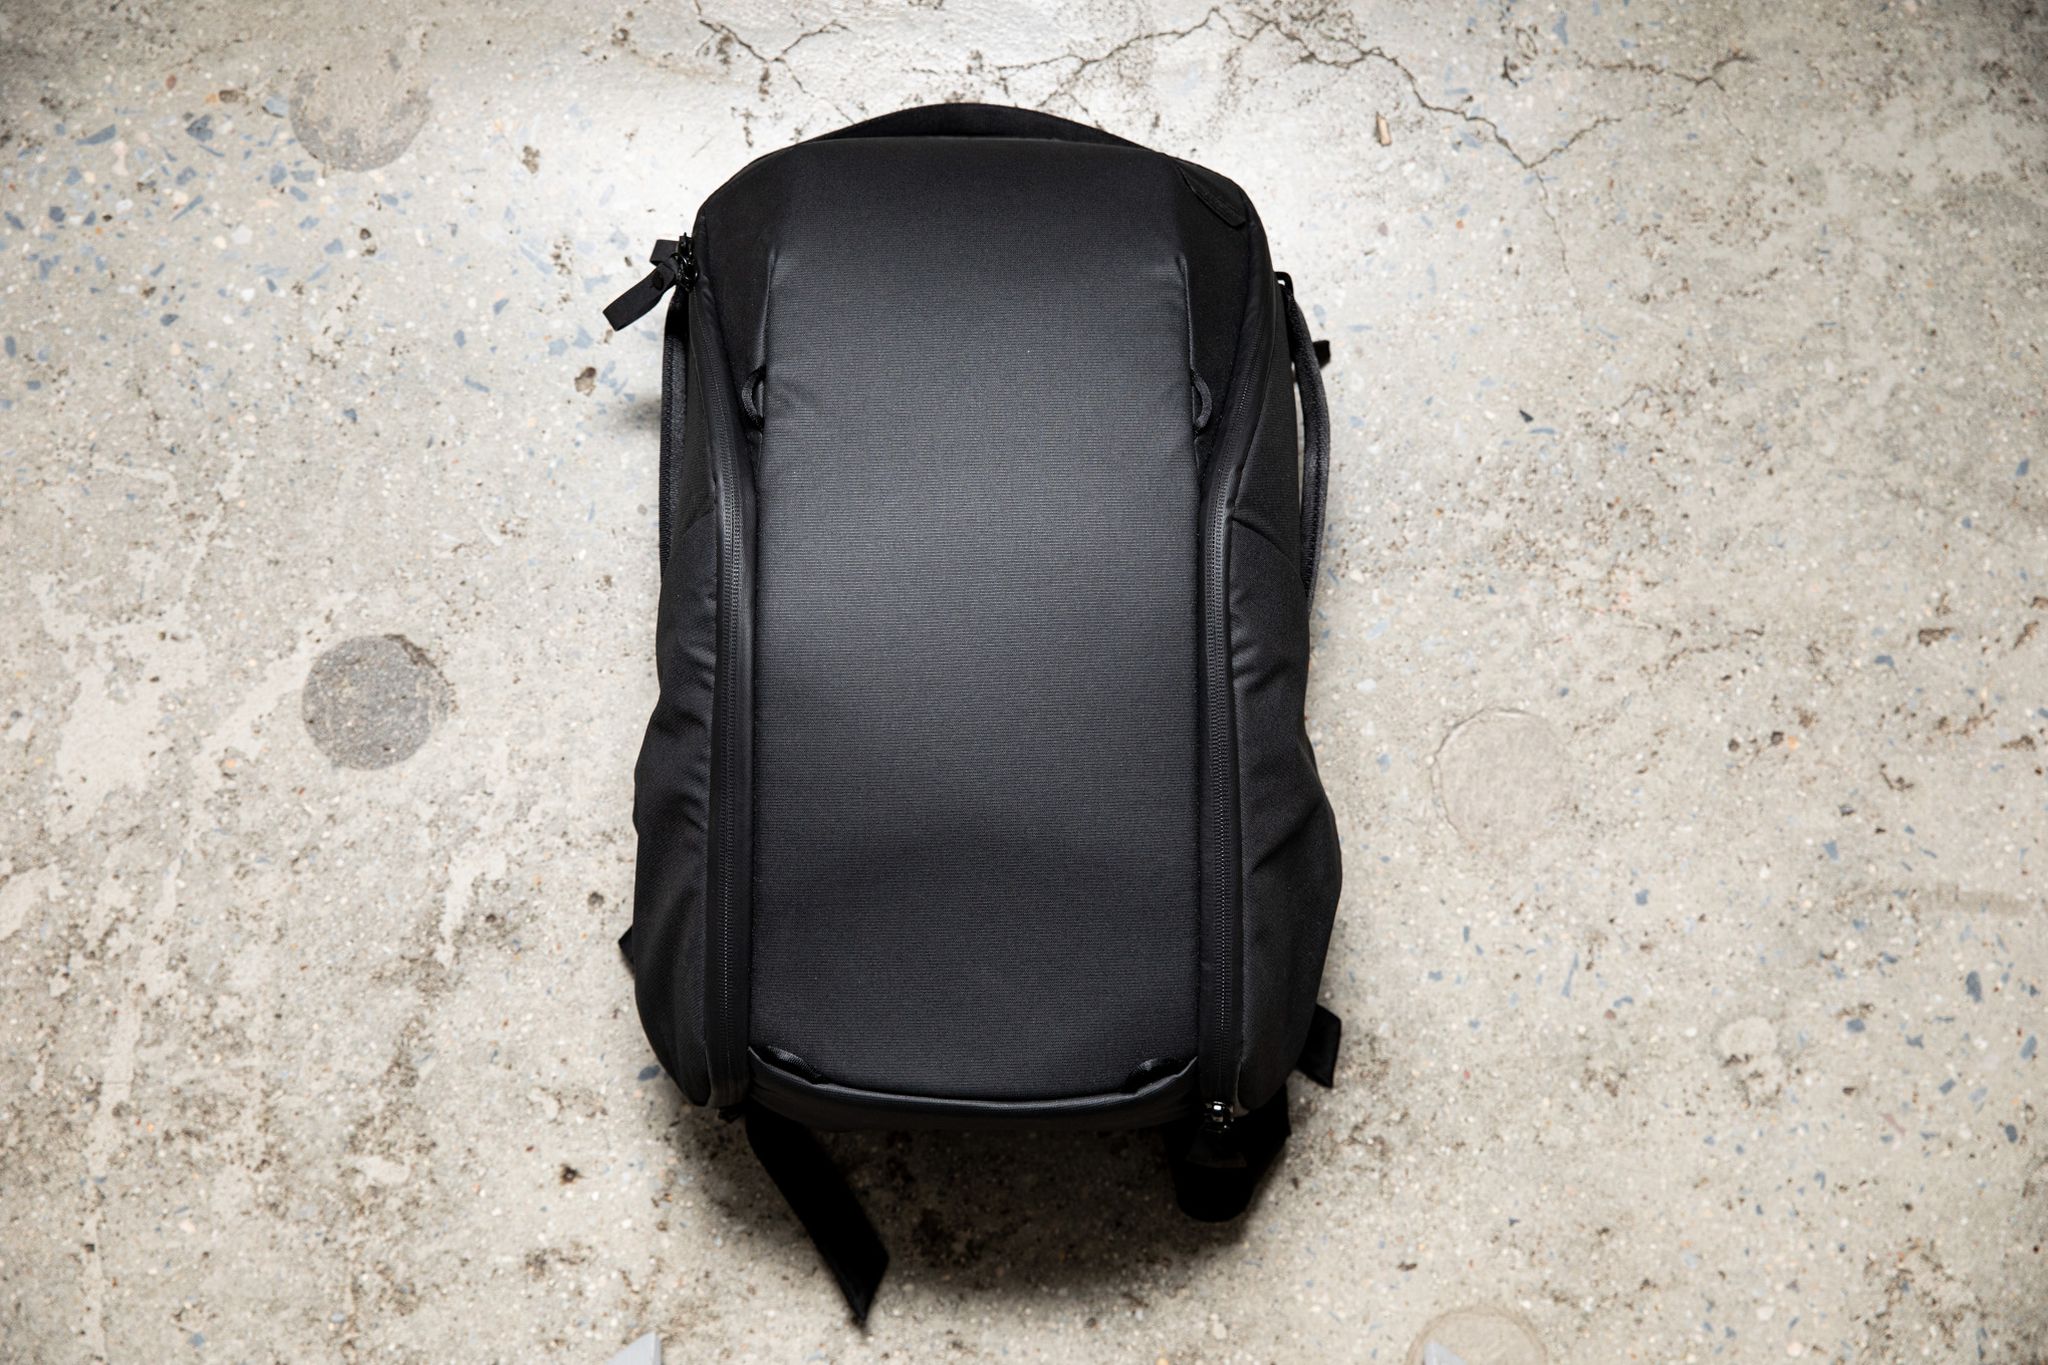 The Verge staff chats about our favorite backpacks, slings, and bags ...